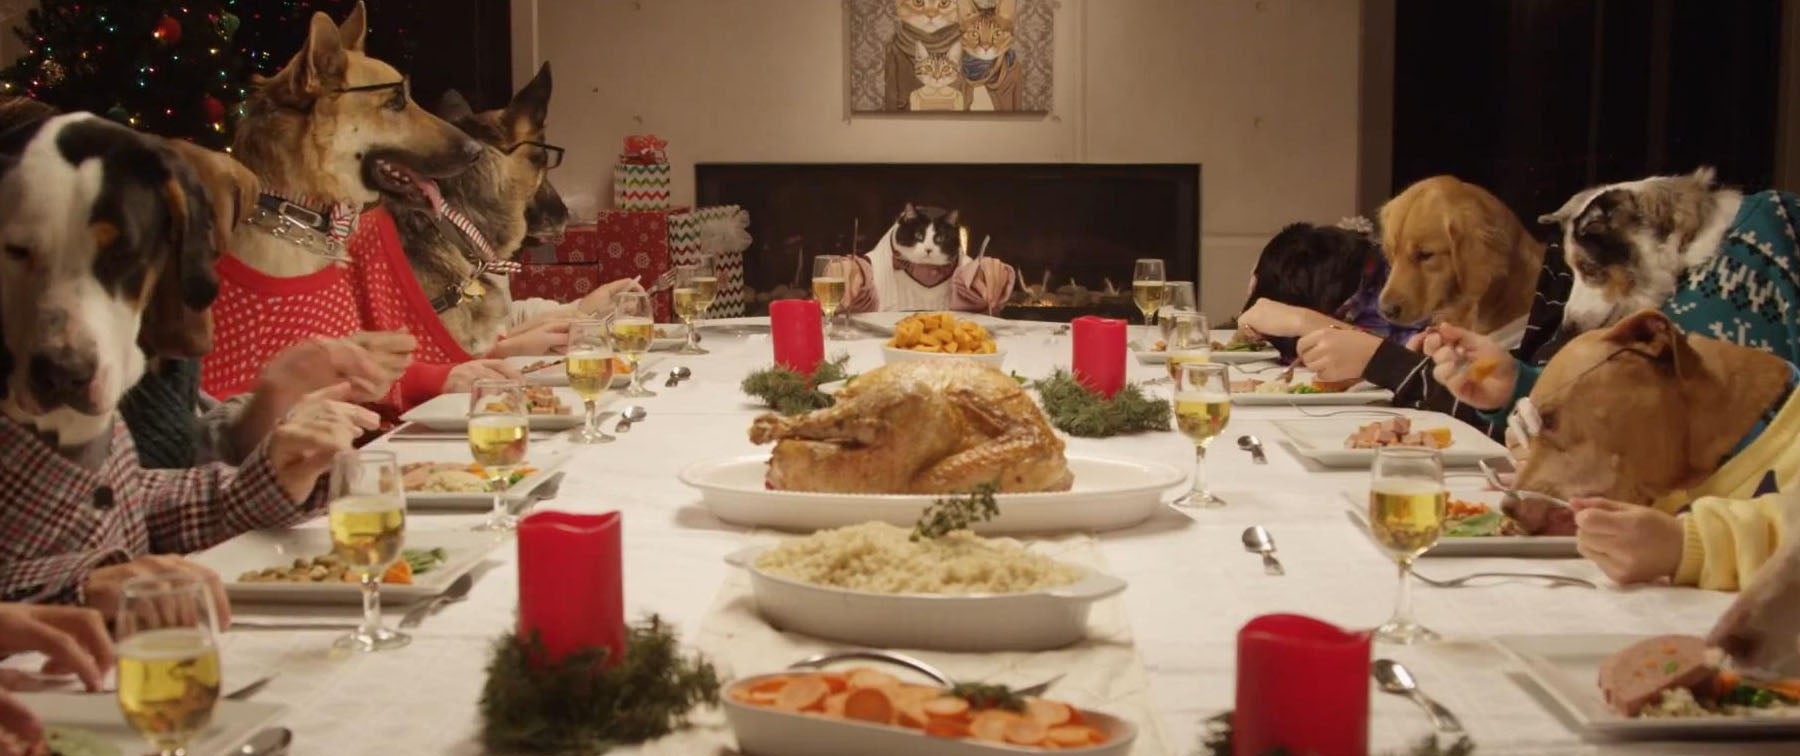 Christmas Dinner: The Dog Do's and Dont's